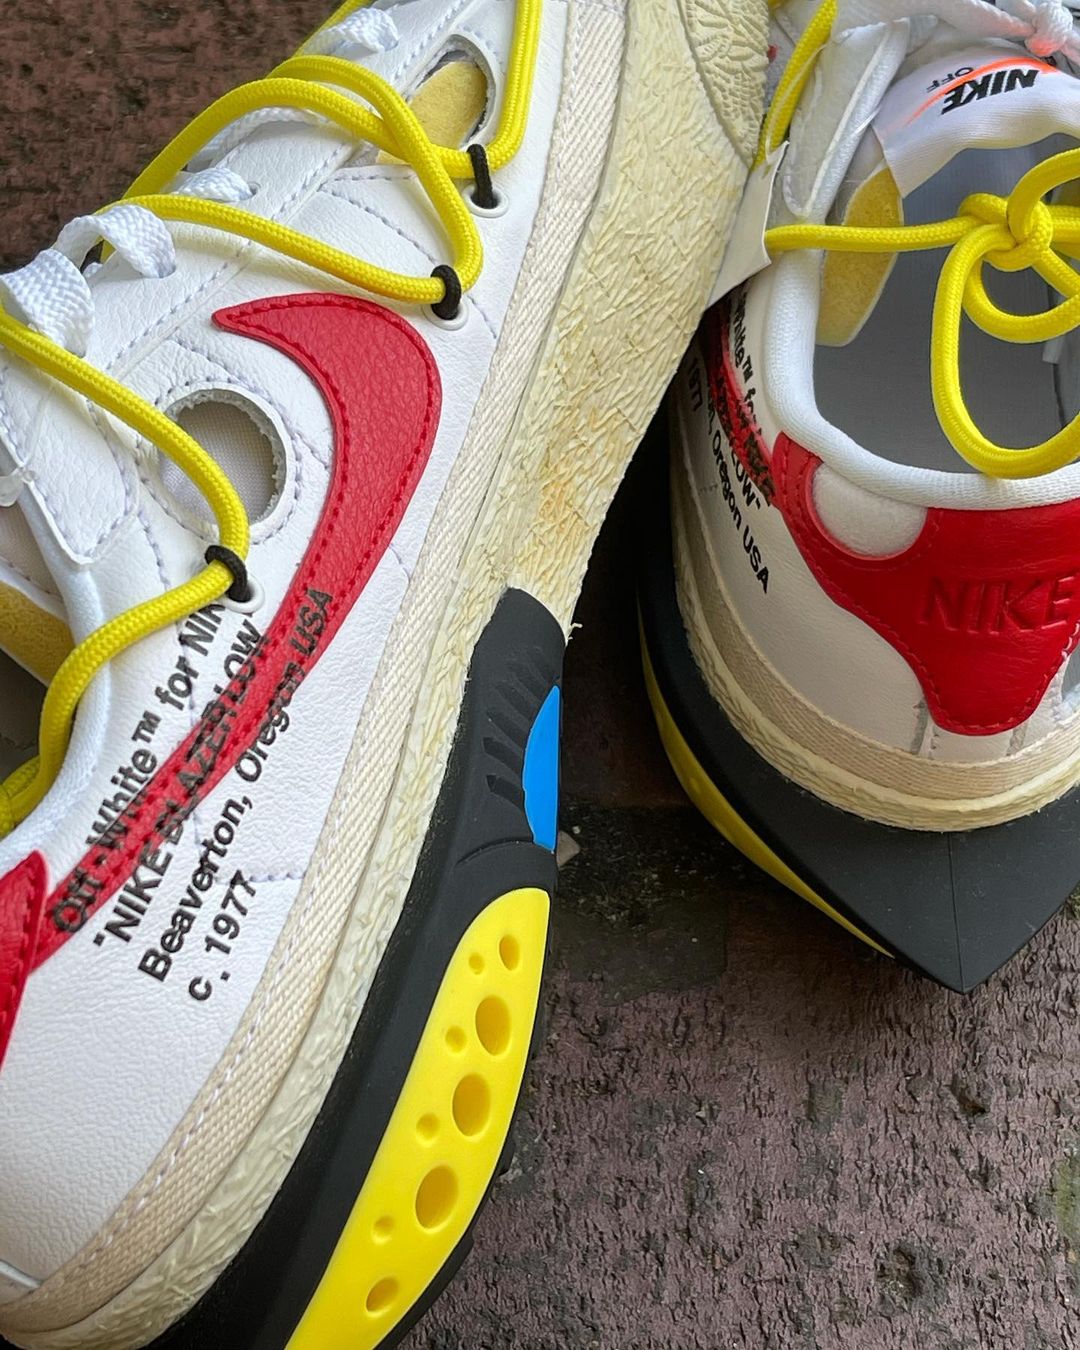 Off-White Deconstructs the Nike Blazer for its Latest Leaked ...